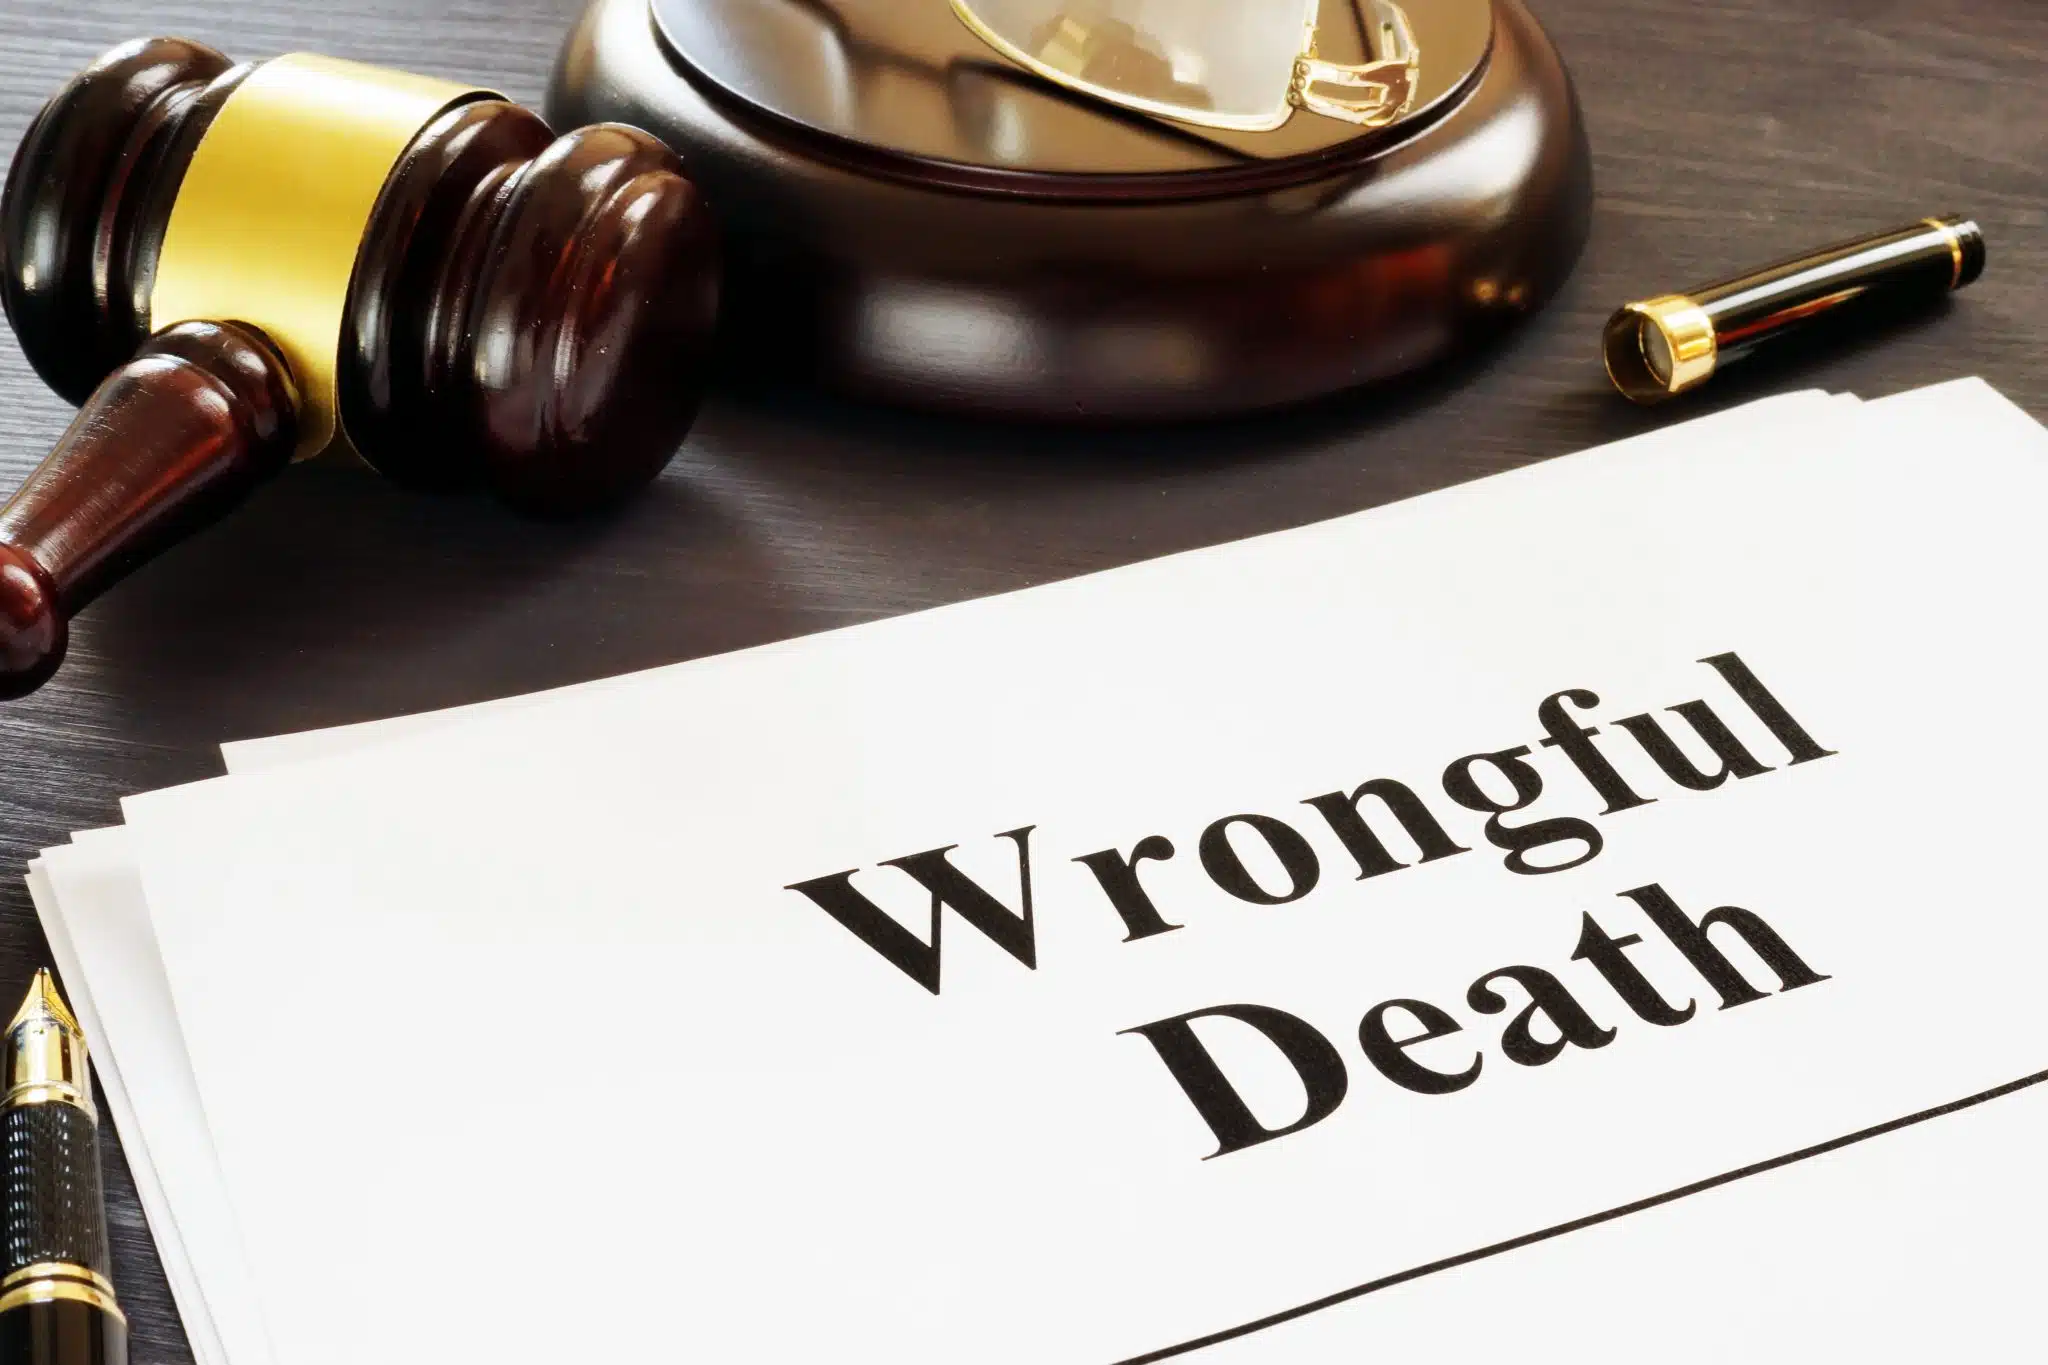 Filing a Wrongful Death Claim After a Car Accident